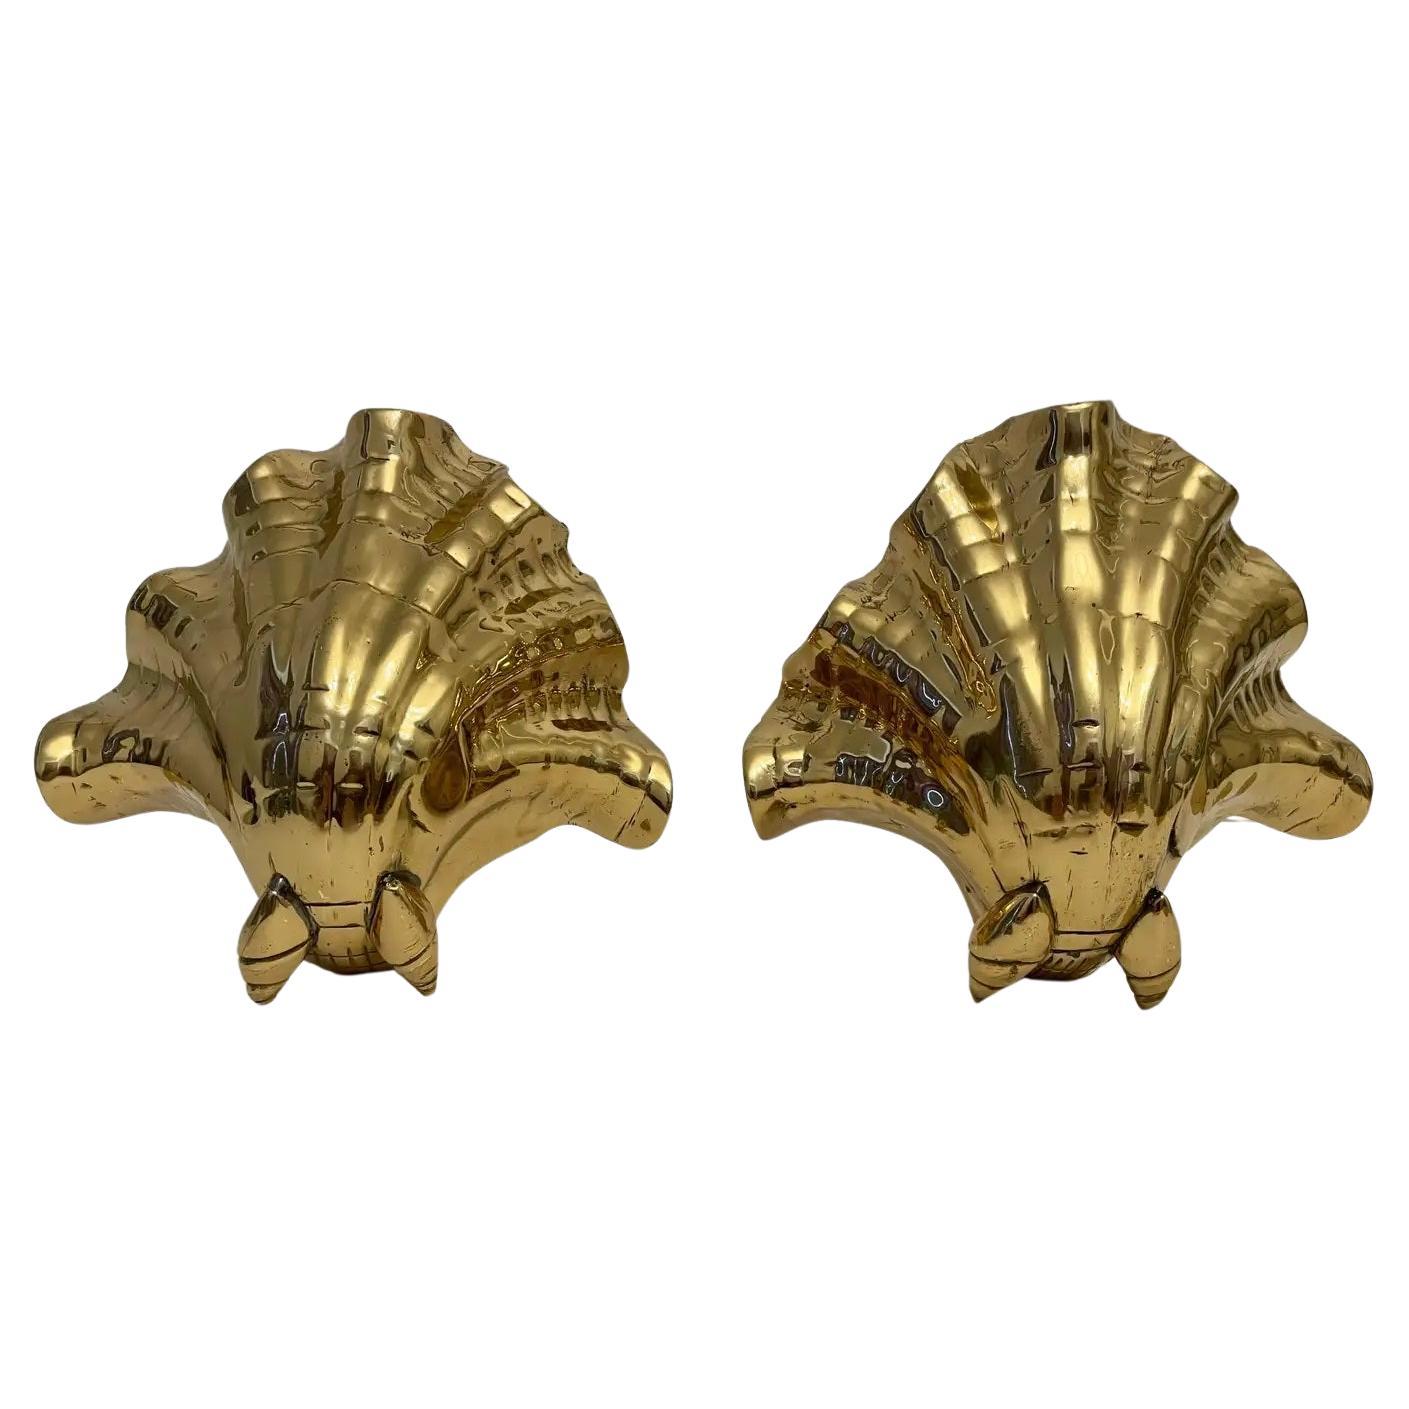 Set of Heavy Solid Brass Seashell Bookends. Very good quality, nice casting details.  Overall good condition. ready to use